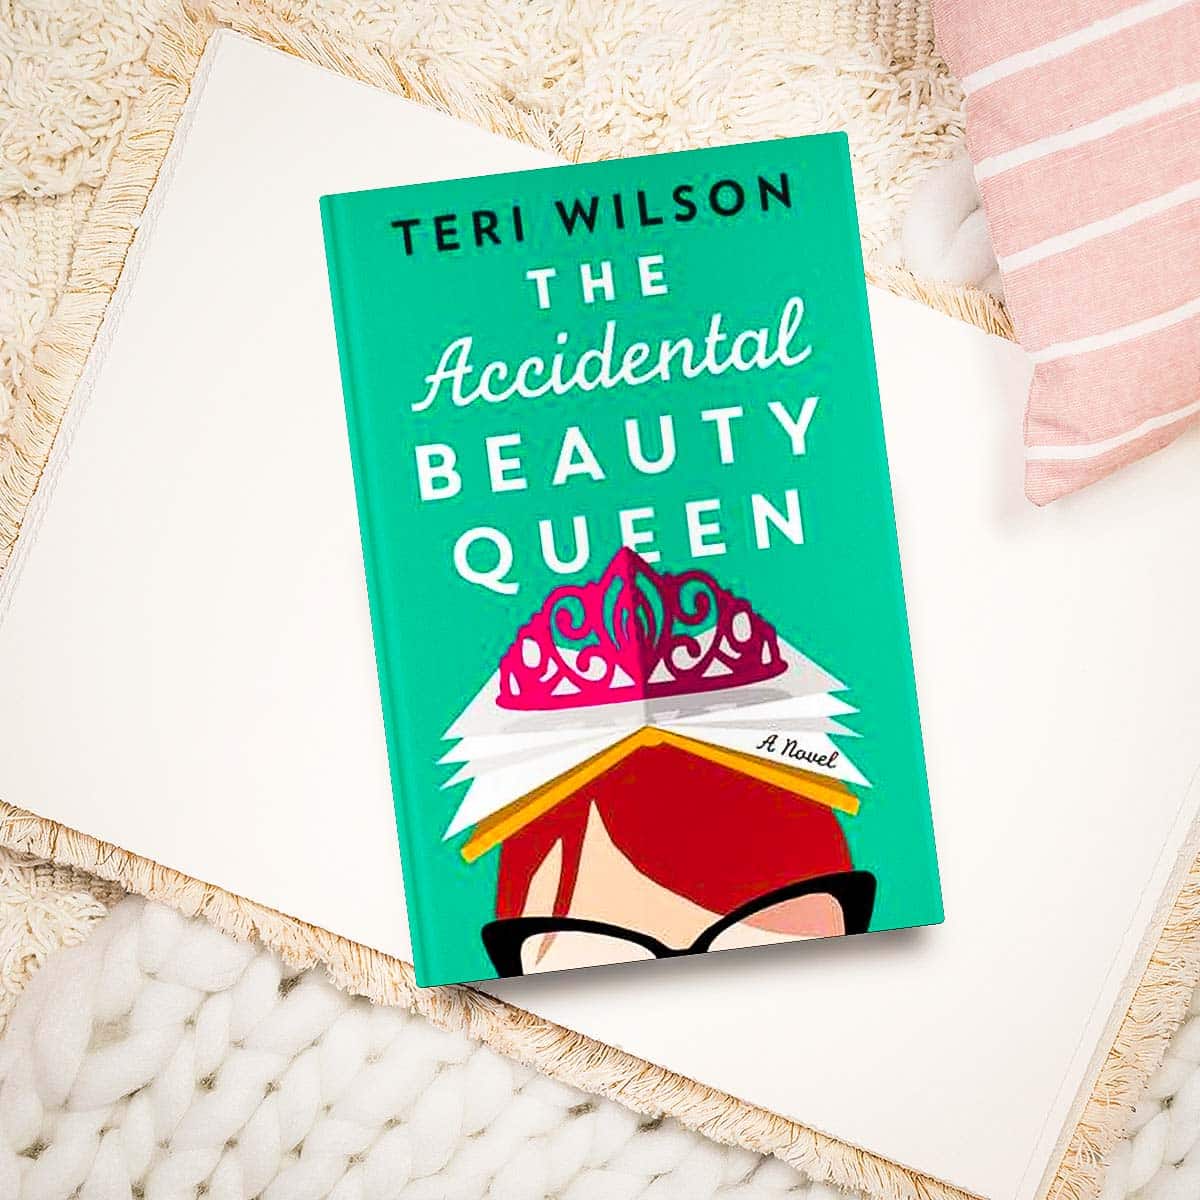 The Accidental Beauty Queen by Teri Wilson is a light and quick read with quirky characters. Miss Congeniality meets The Parent Trap twin swap shenanigans!